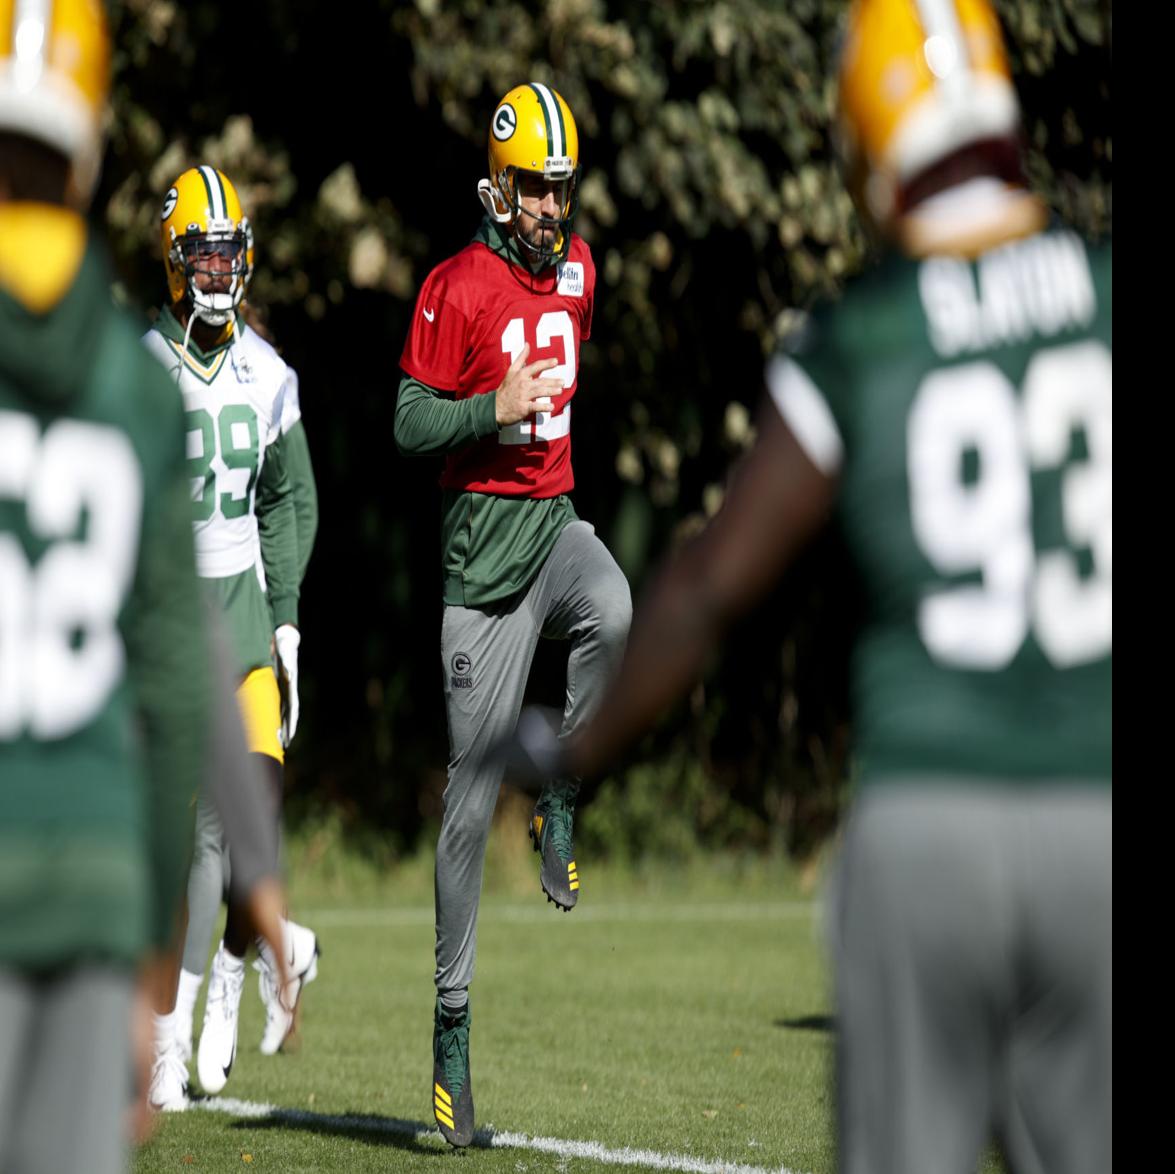 Packers play 1st international game, facing Giants in London